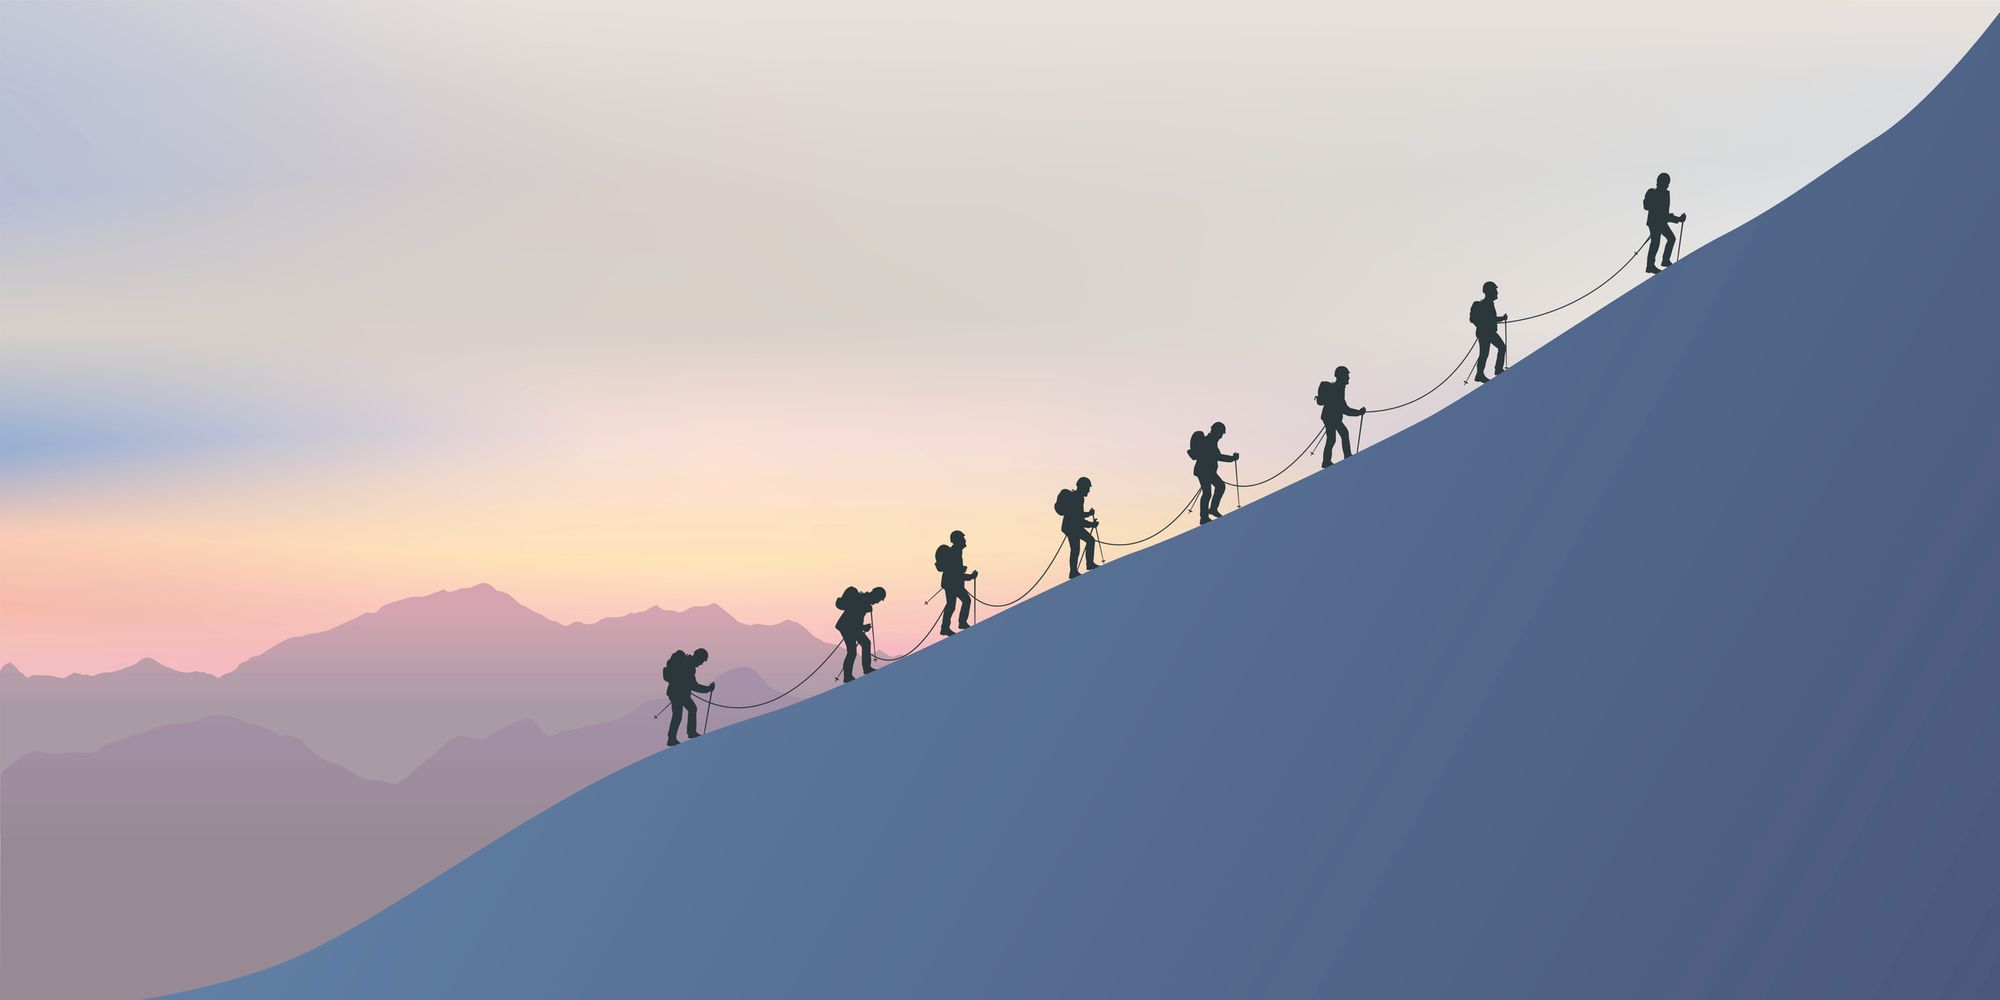 An illustration of climbers roped together.